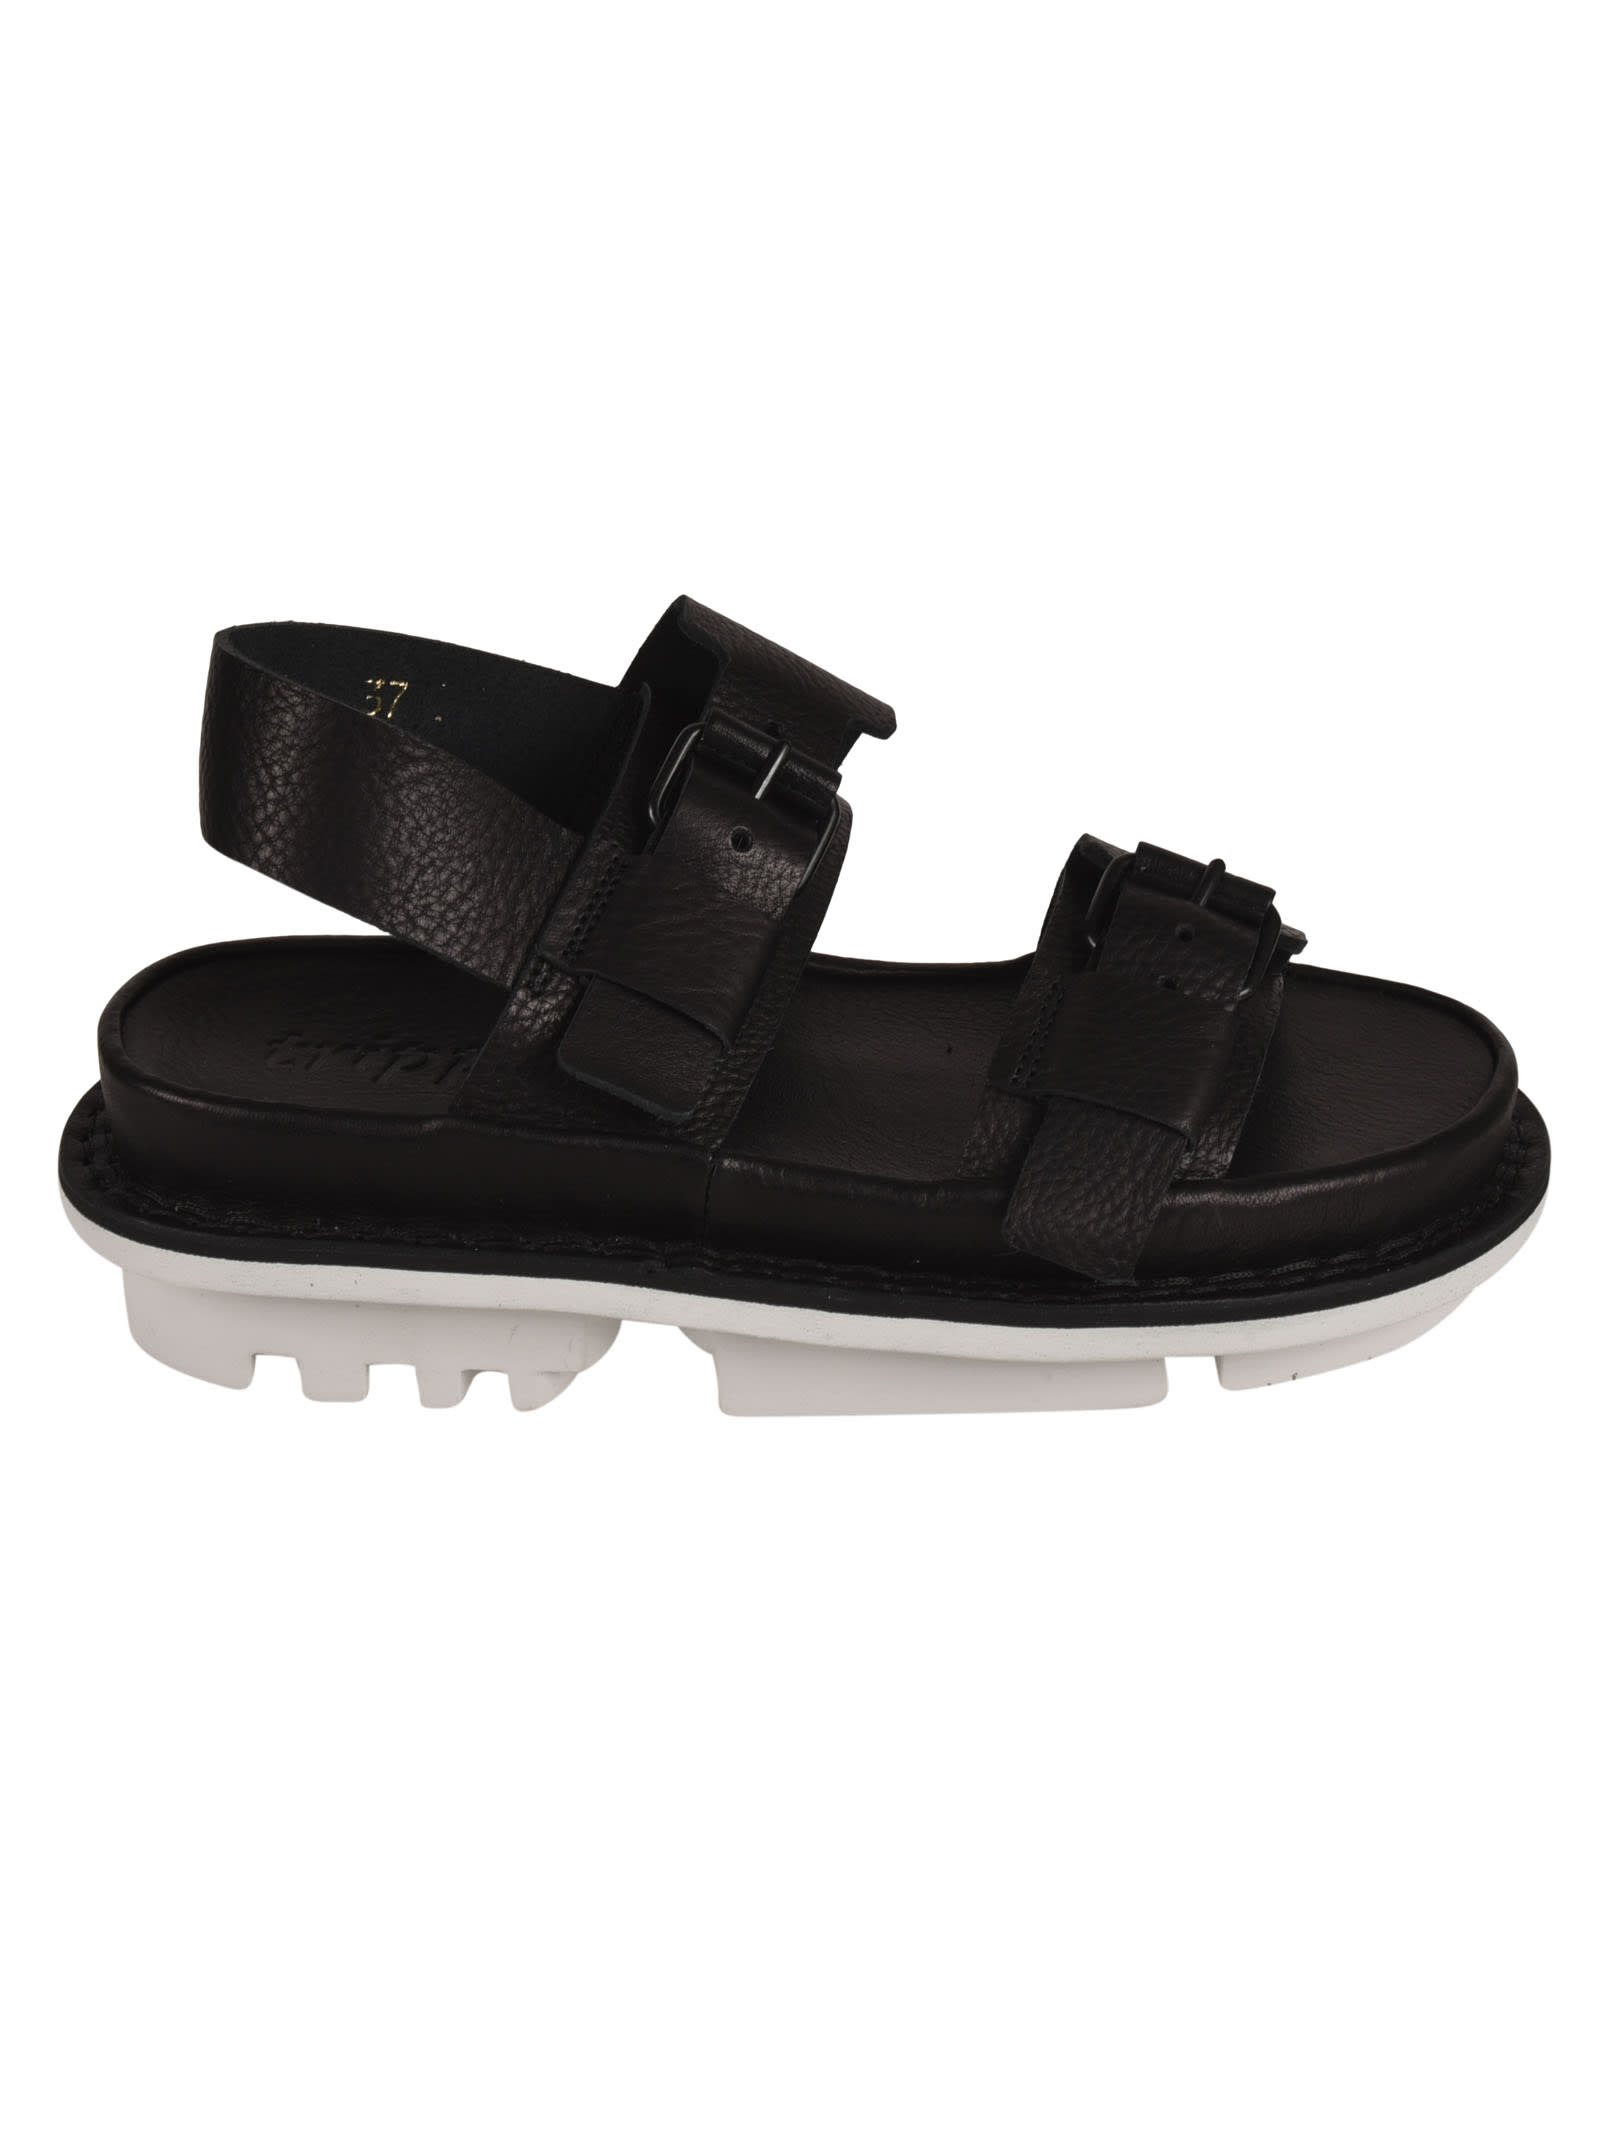 Trippen Double Side-buckled Strap Sandals